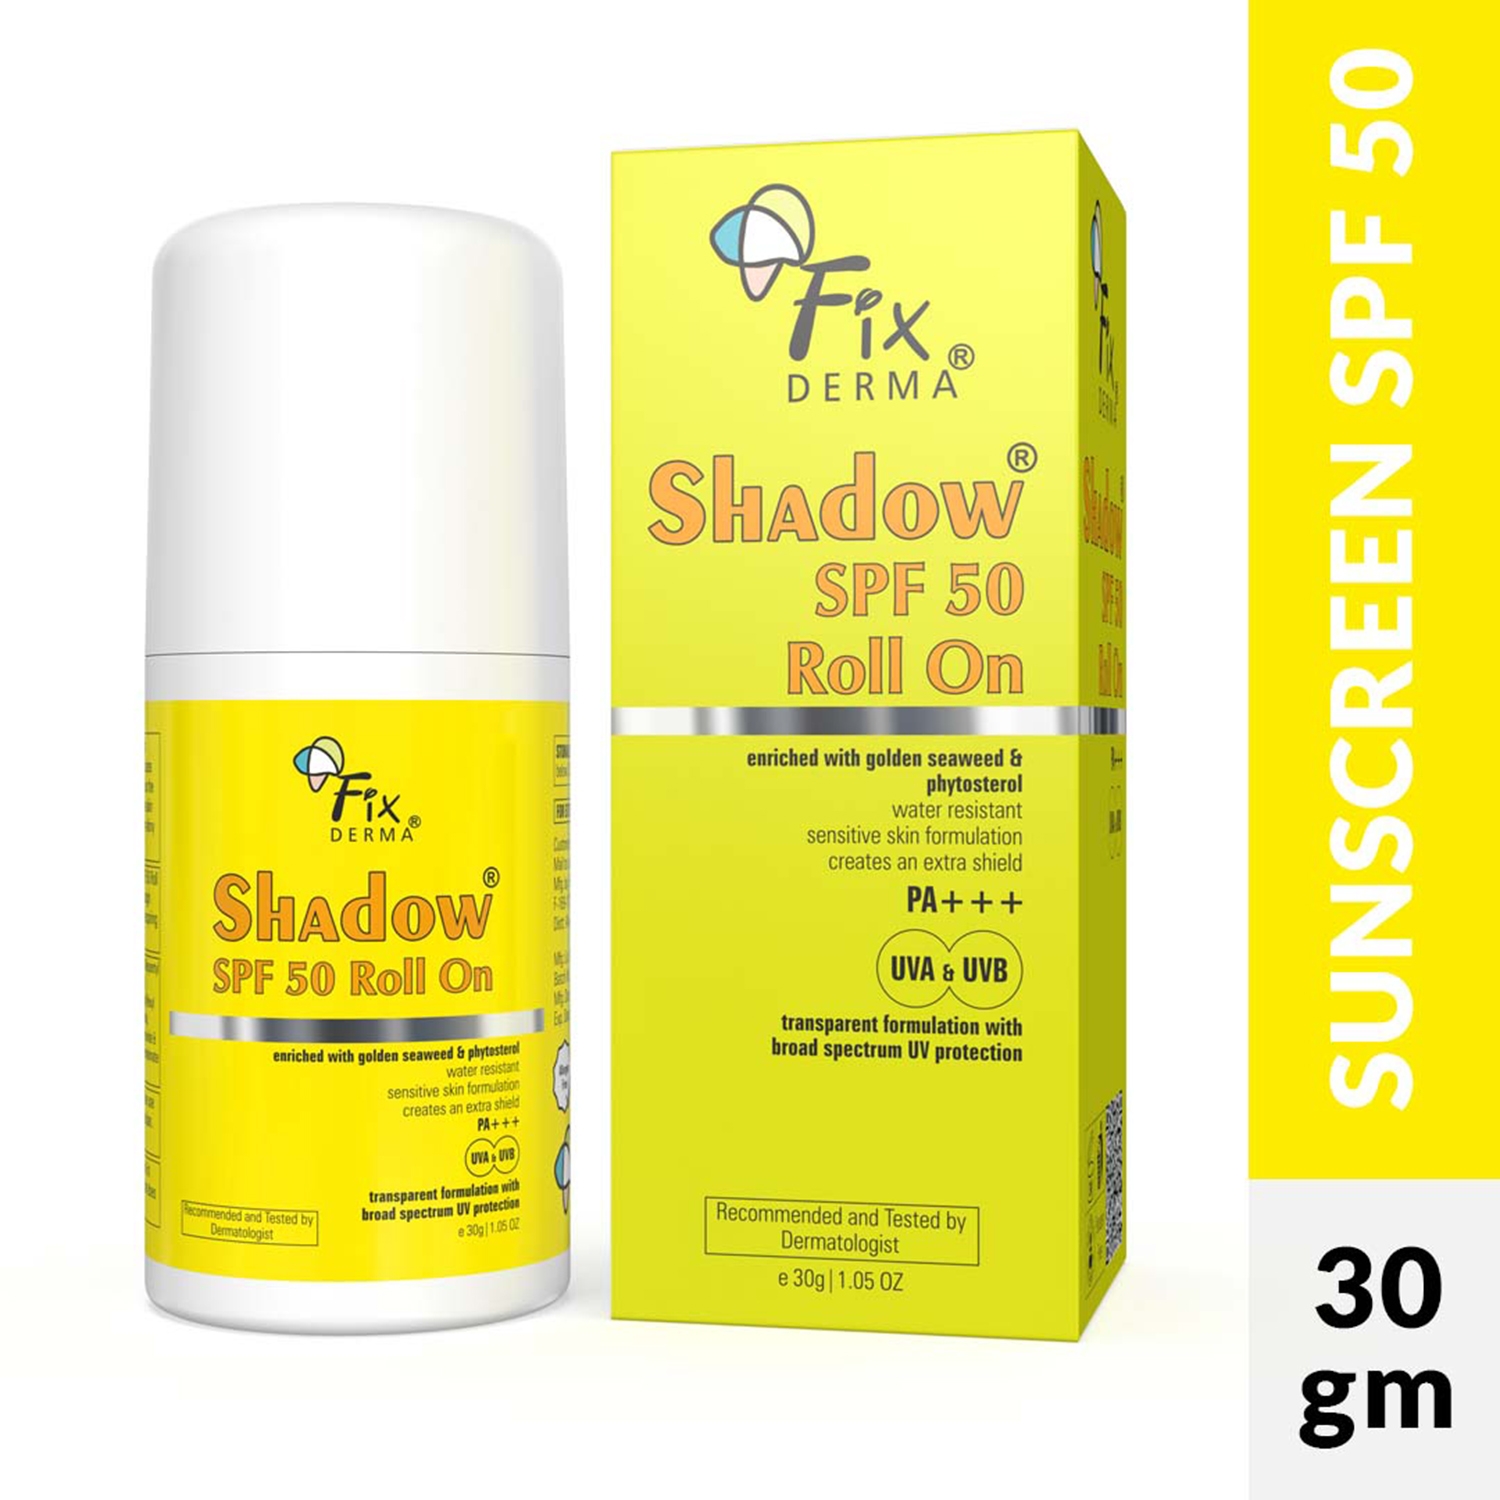 Fixderma Shadow Sunscreen Roll On SPF 50 PA+++ UVA & UVB Protection (30g)